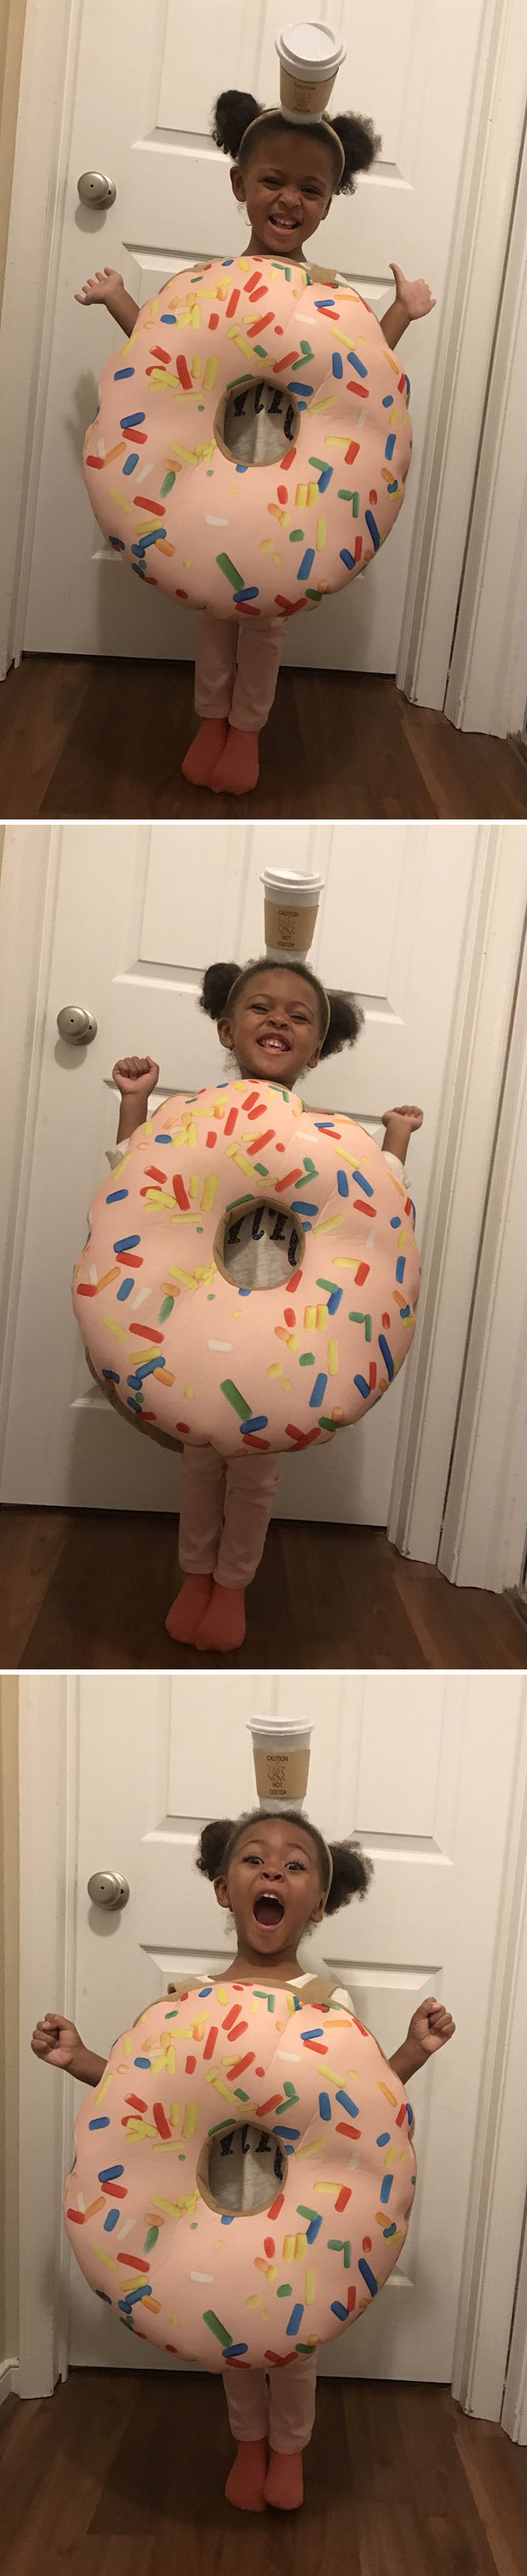 Took Layla Costume Shopping Today And She Wanted To Be A Donut.... A Freaking Donut